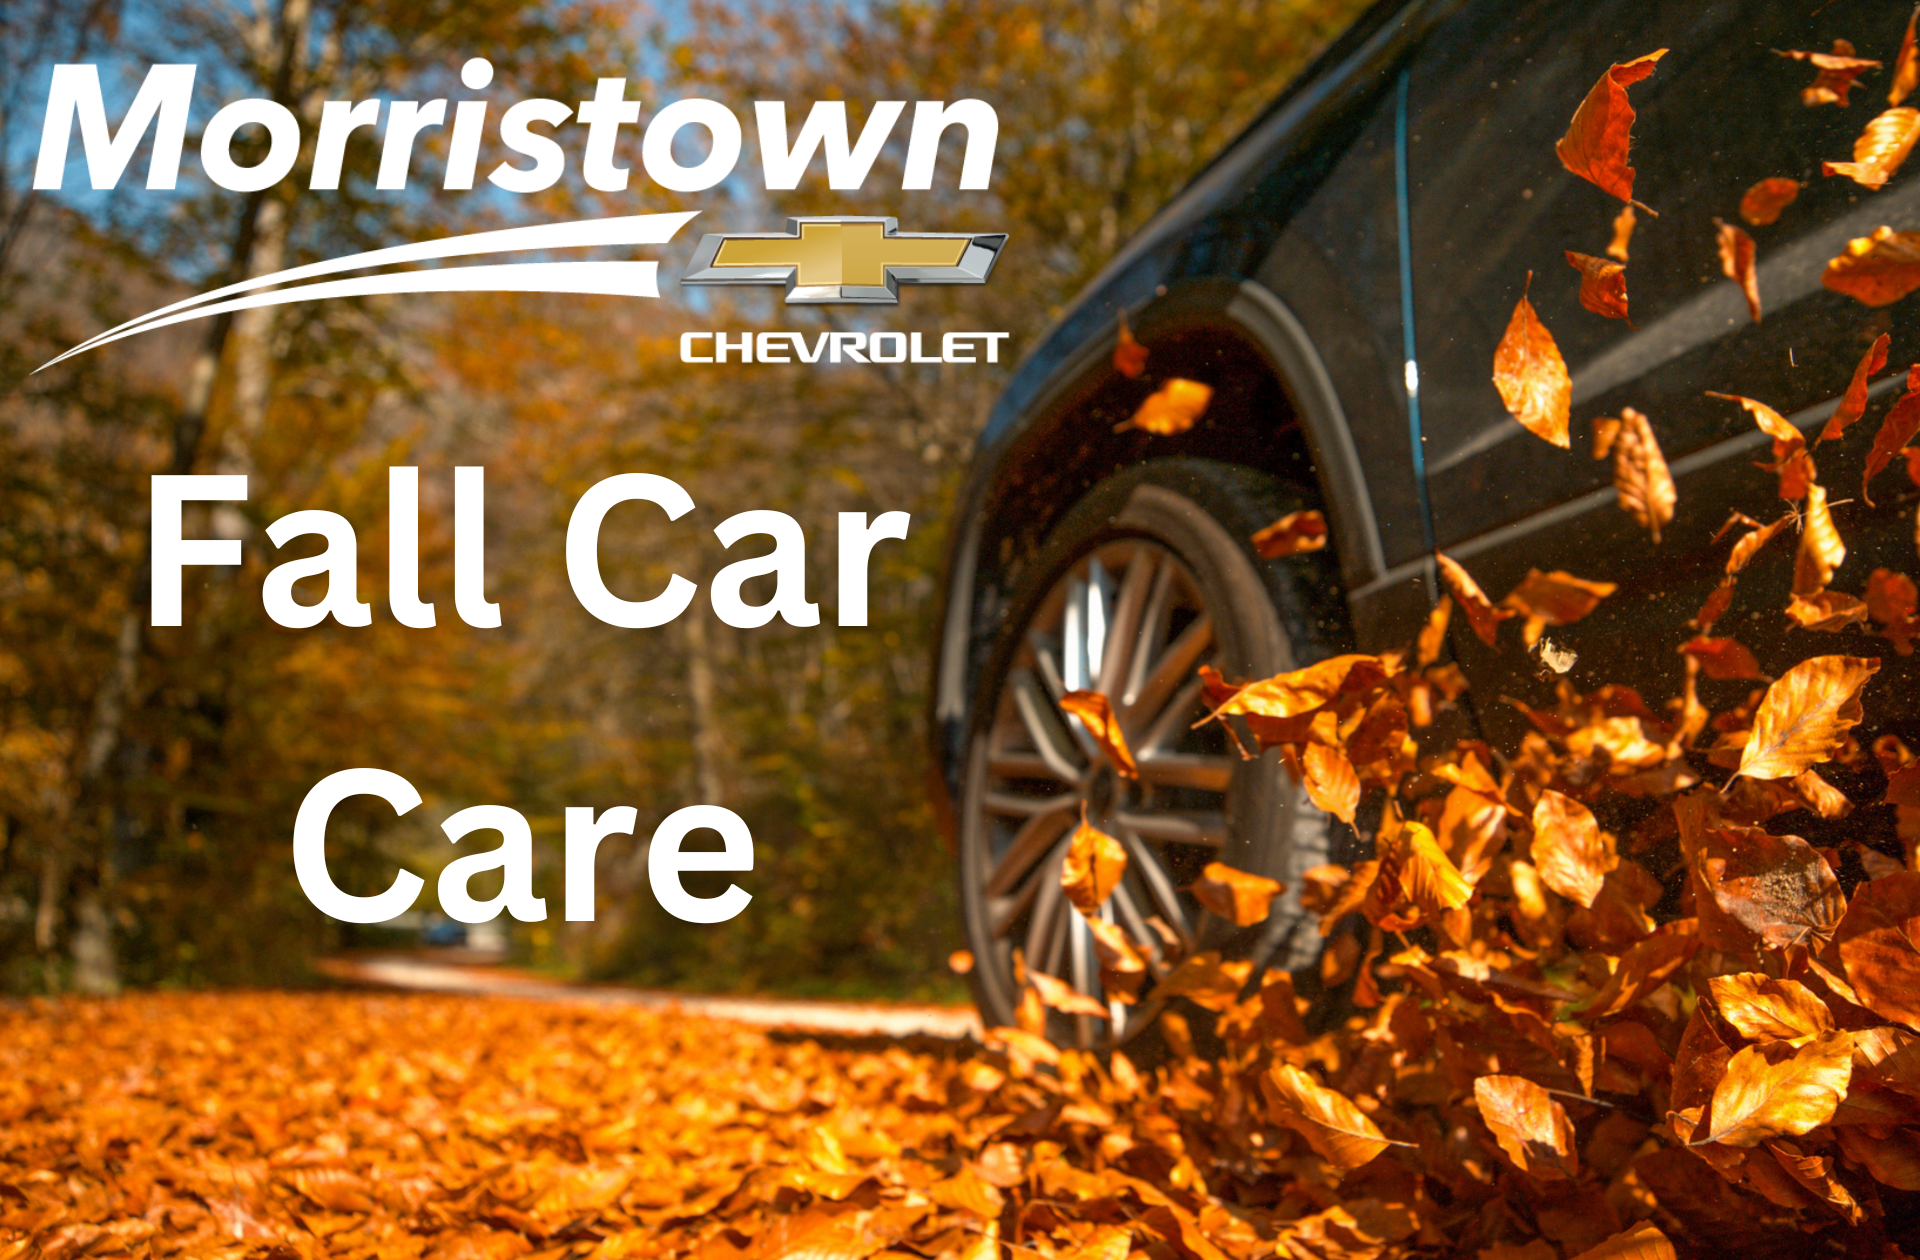 Fall Car Care Month Morristown Chevrolet